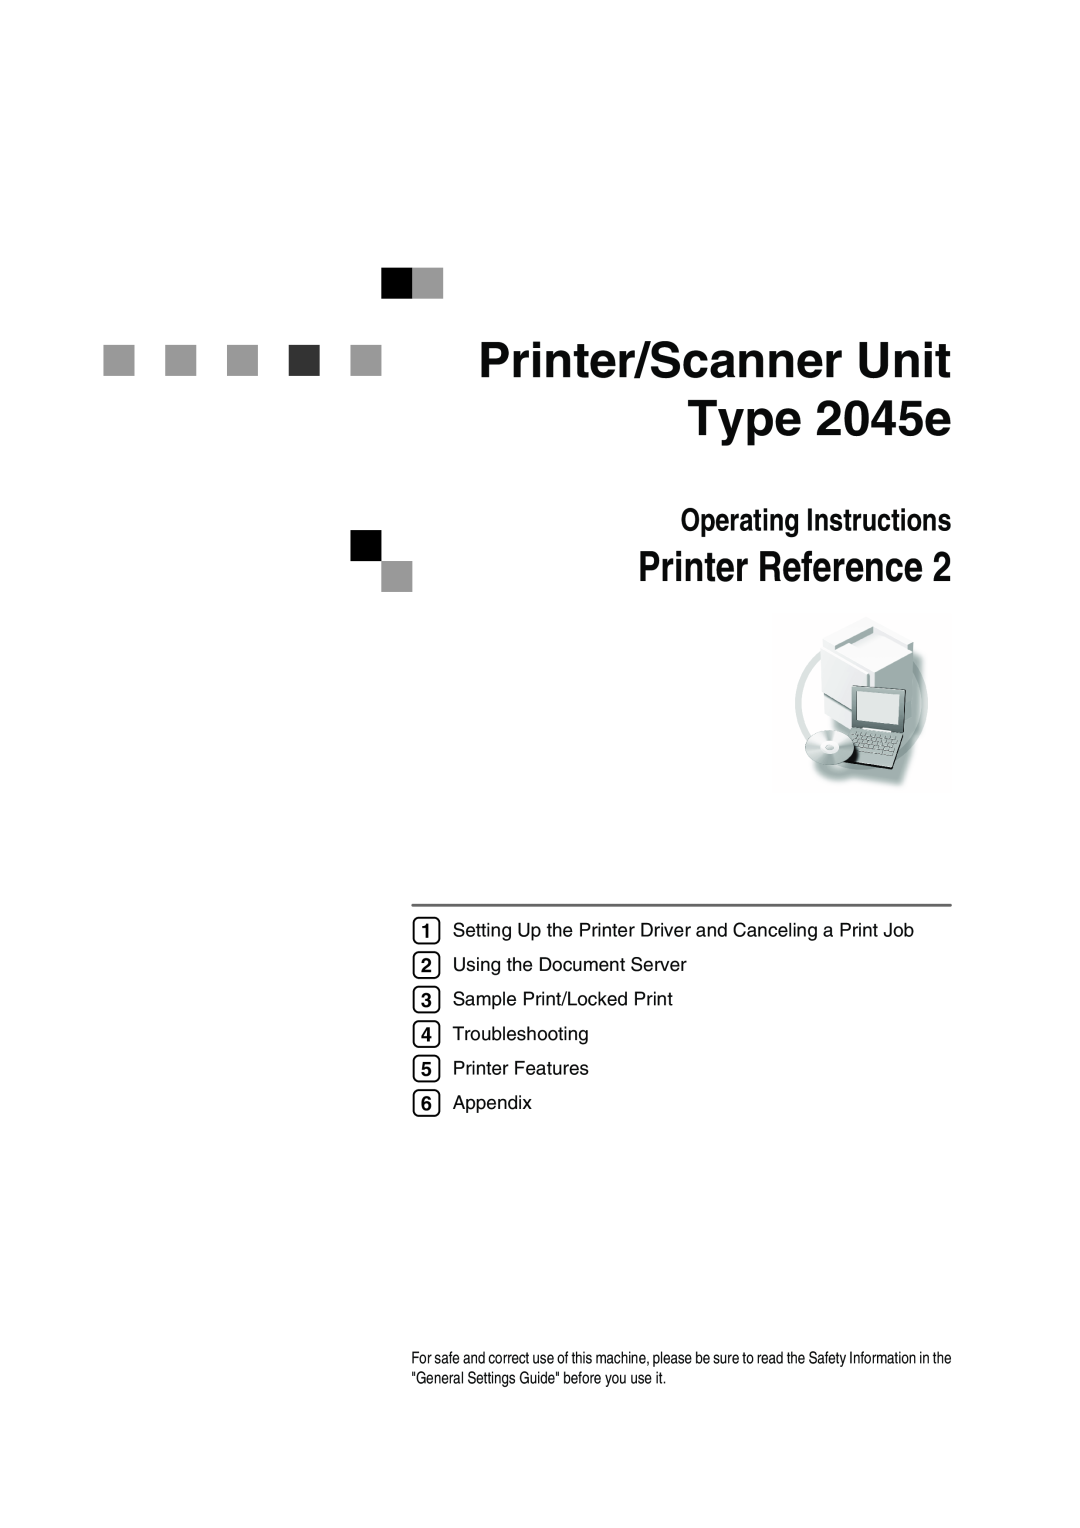 Xerox appendix Printer/Scanner Unit Type 2045e, Printer Reference, Operating Instructions 